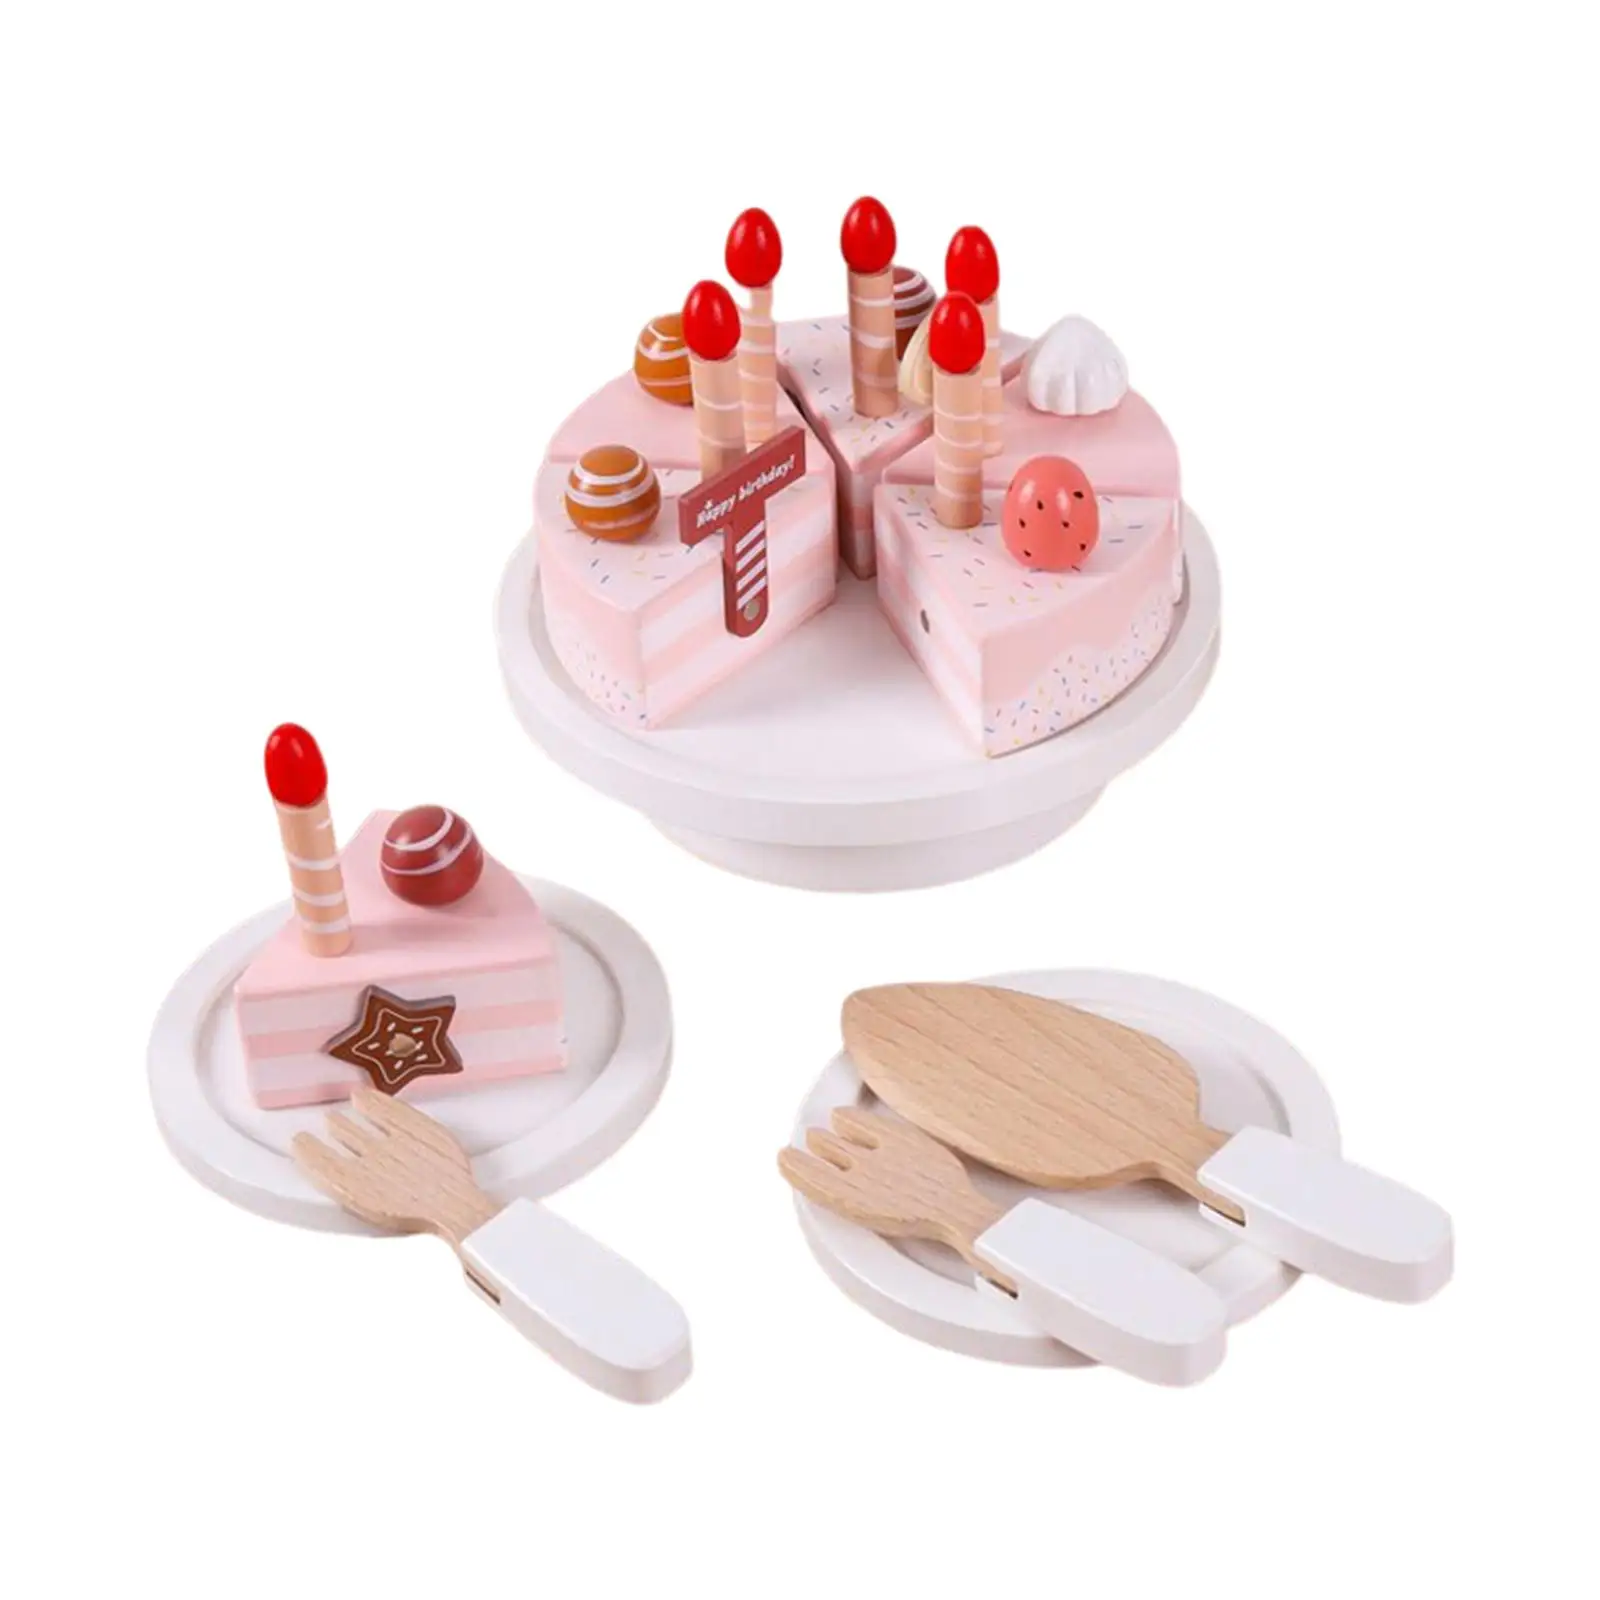 Simulation Wooden Cake Toys Indoor Activity Set Montessori Toys Education Cooking Toy Pretend Play for Children Holiday Gifts